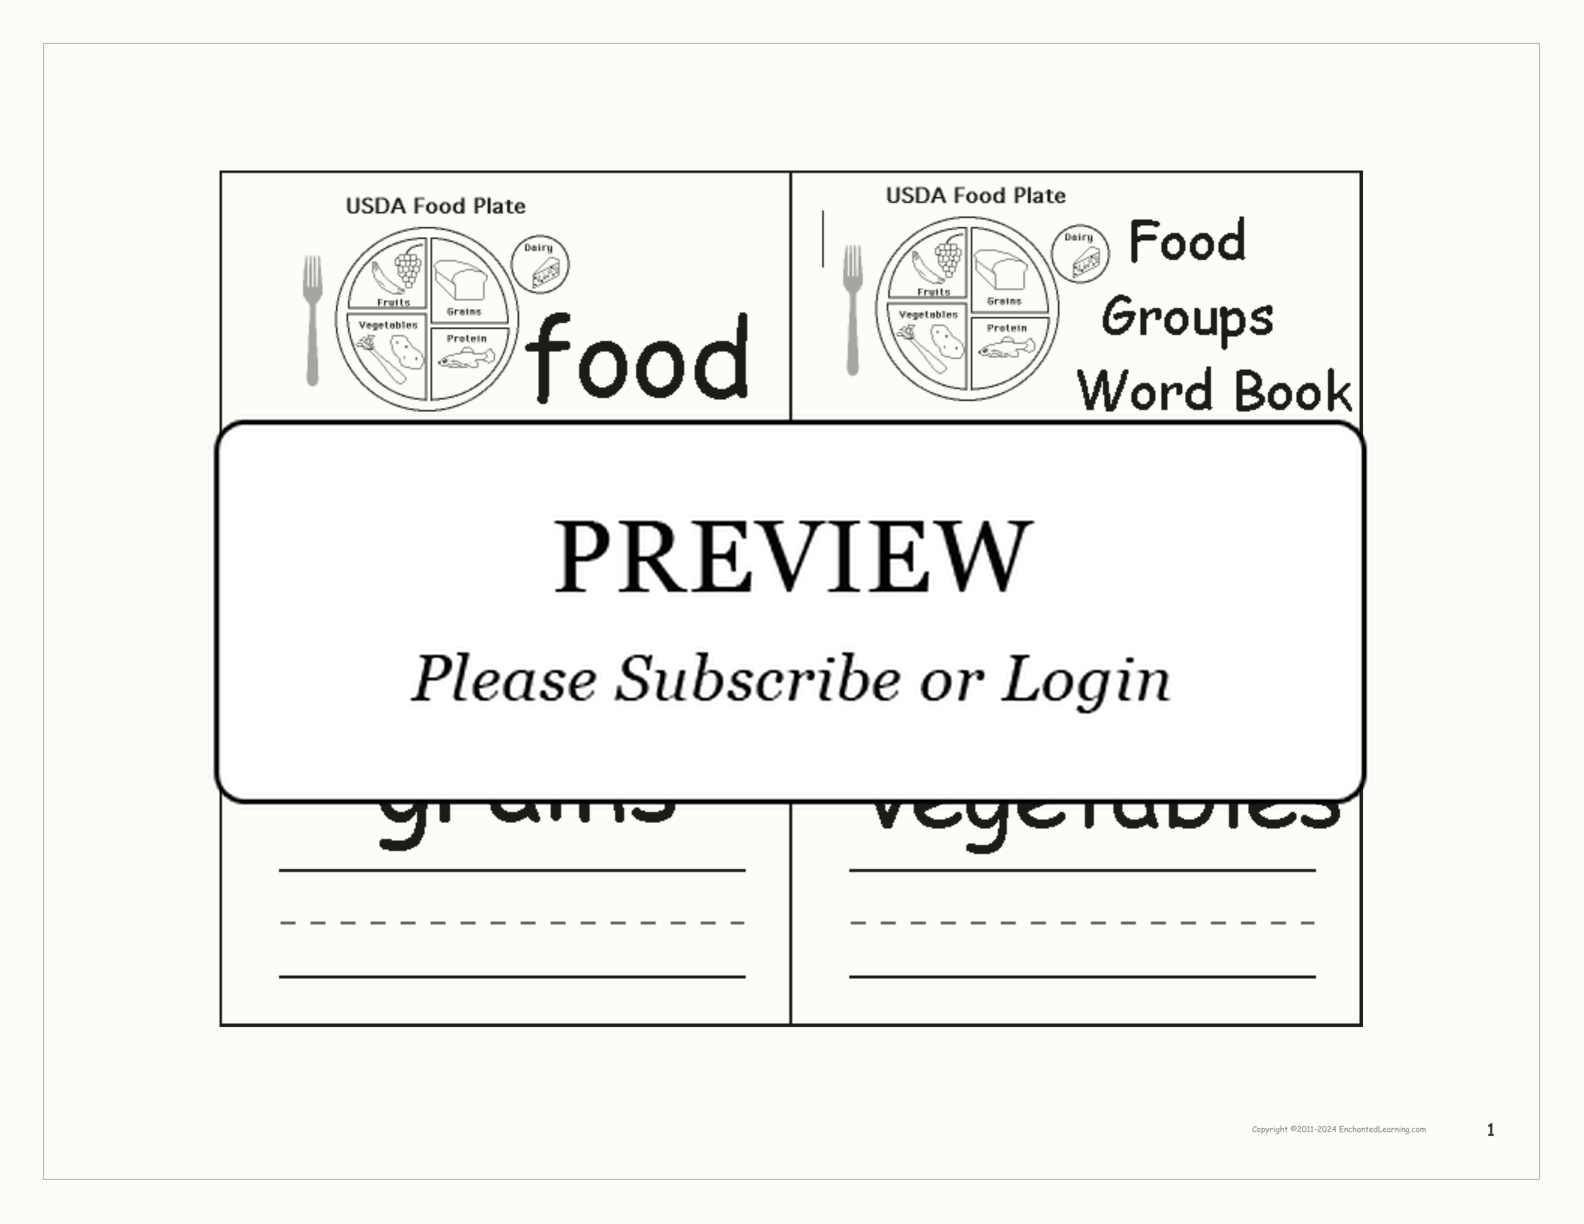 Food Groups Word Book interactive printout page 1